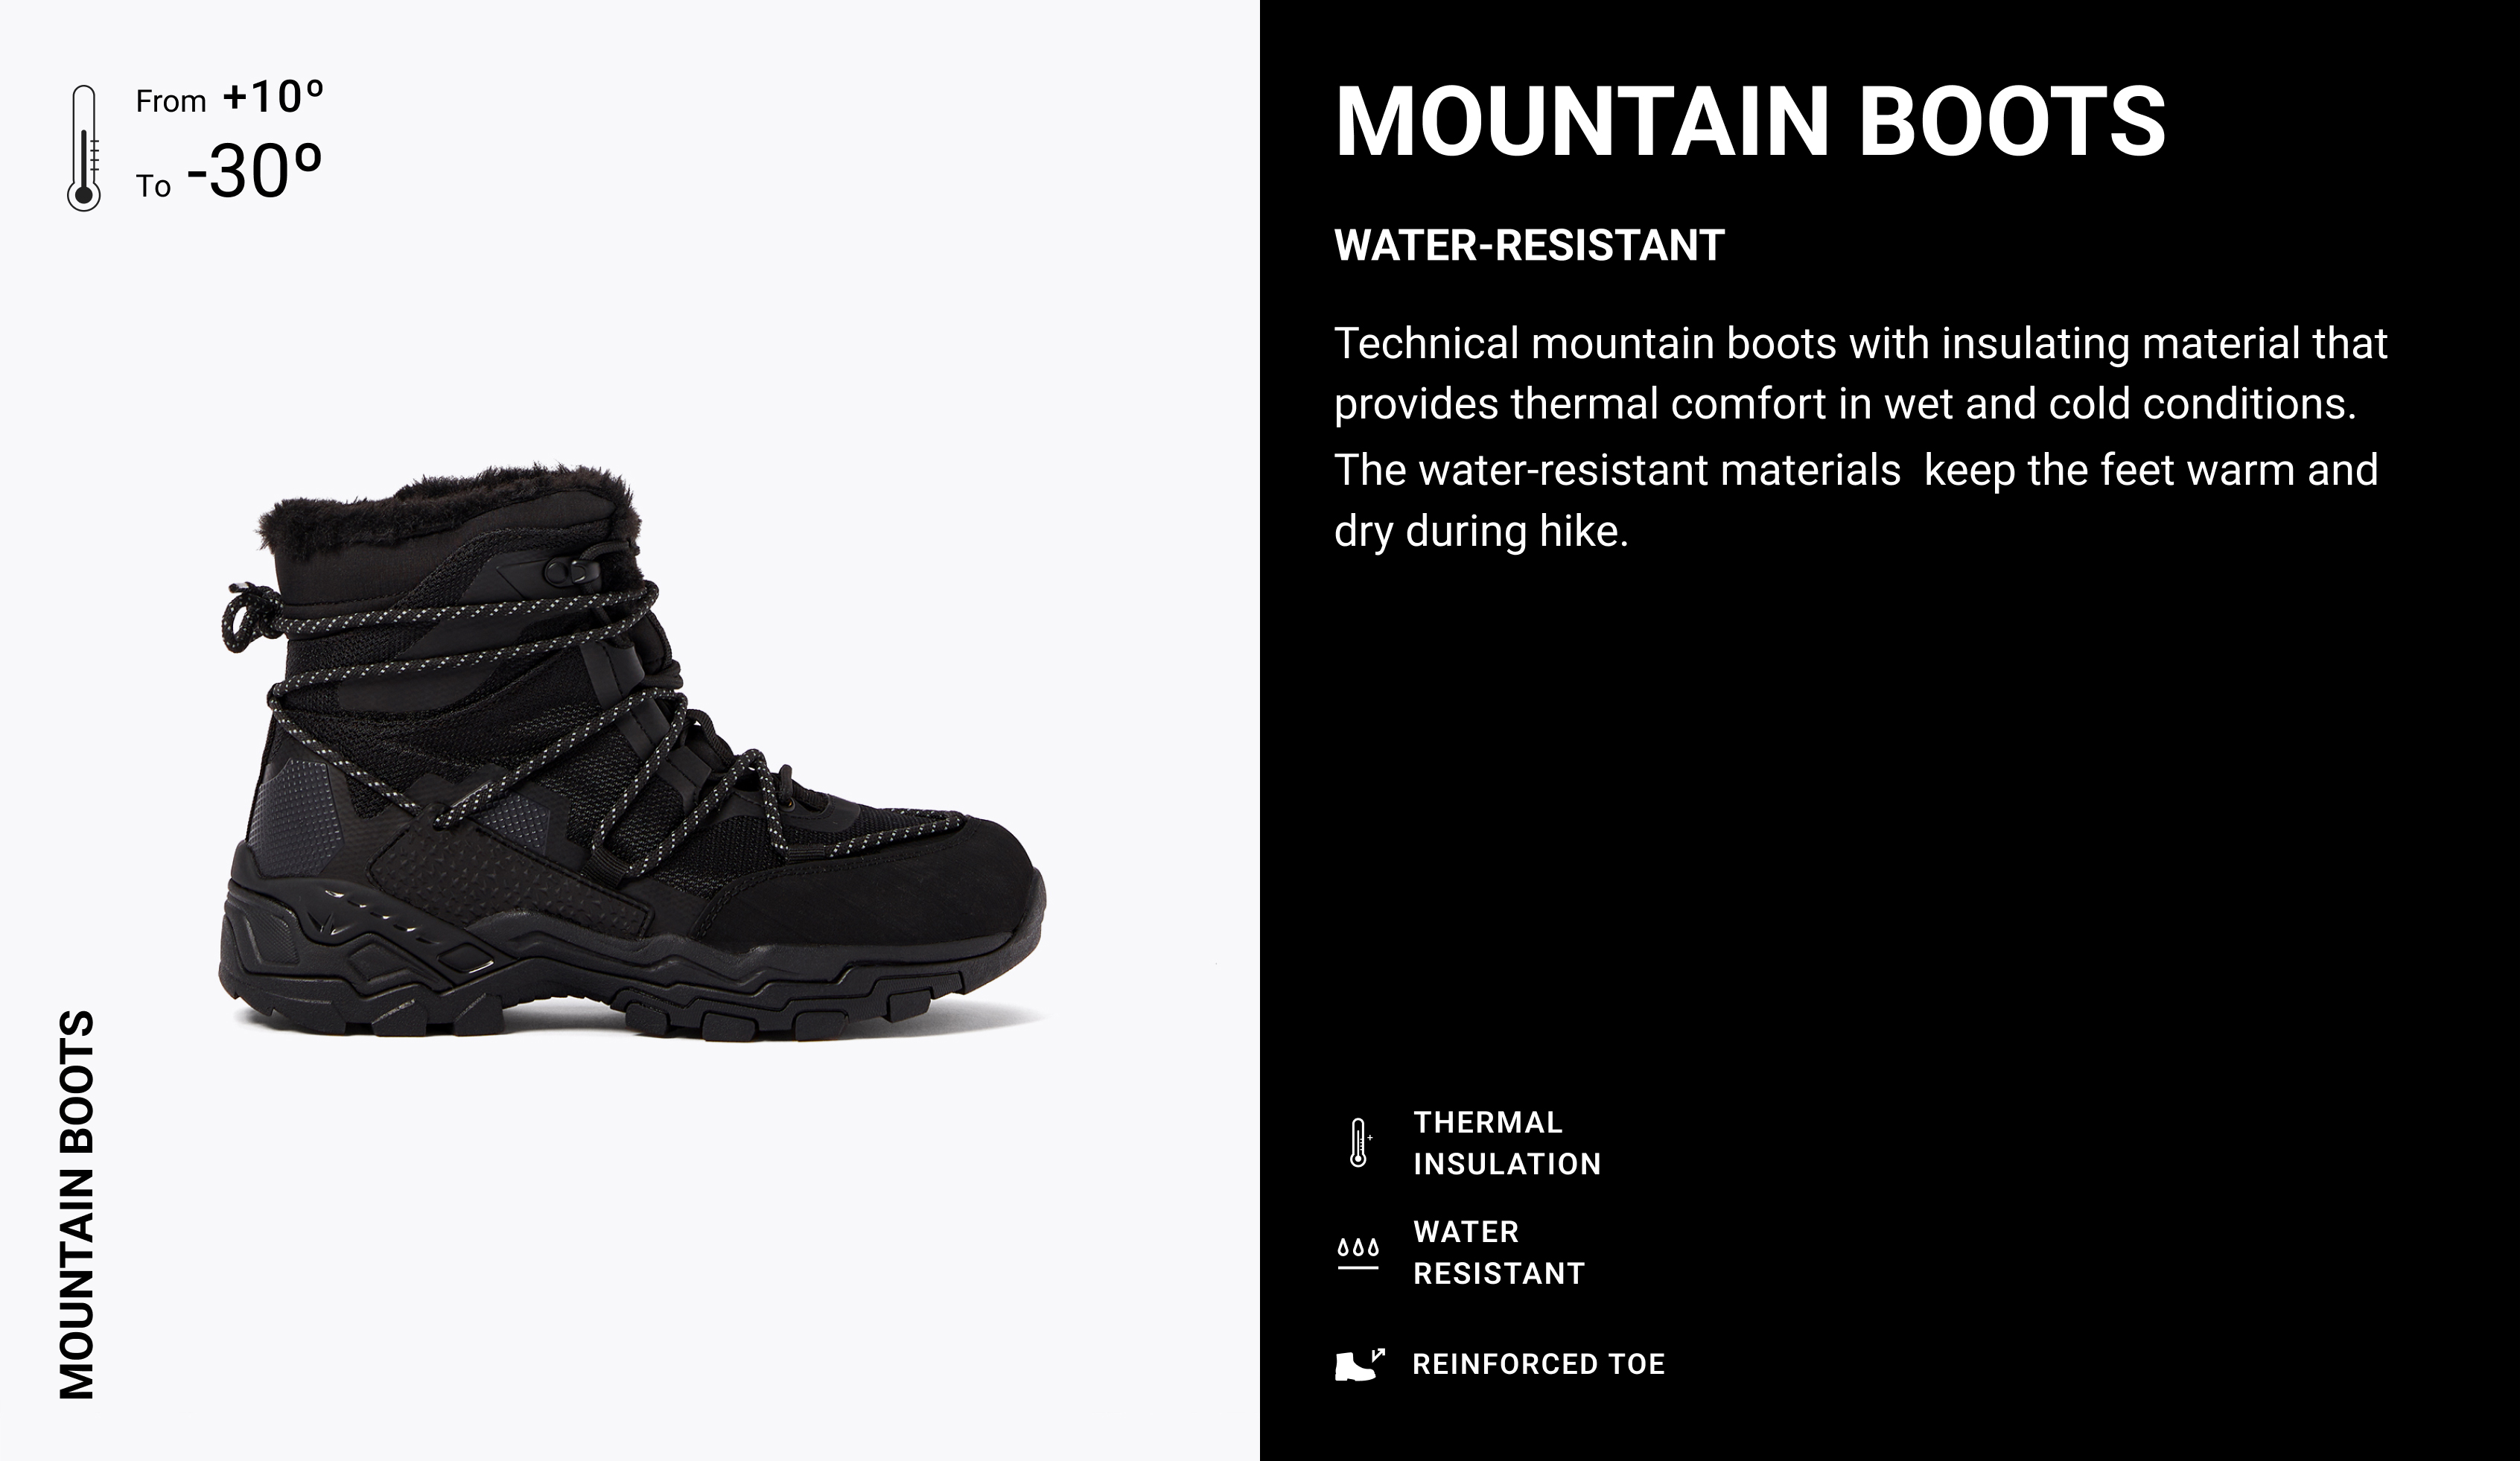 Mountain boots with furry inner